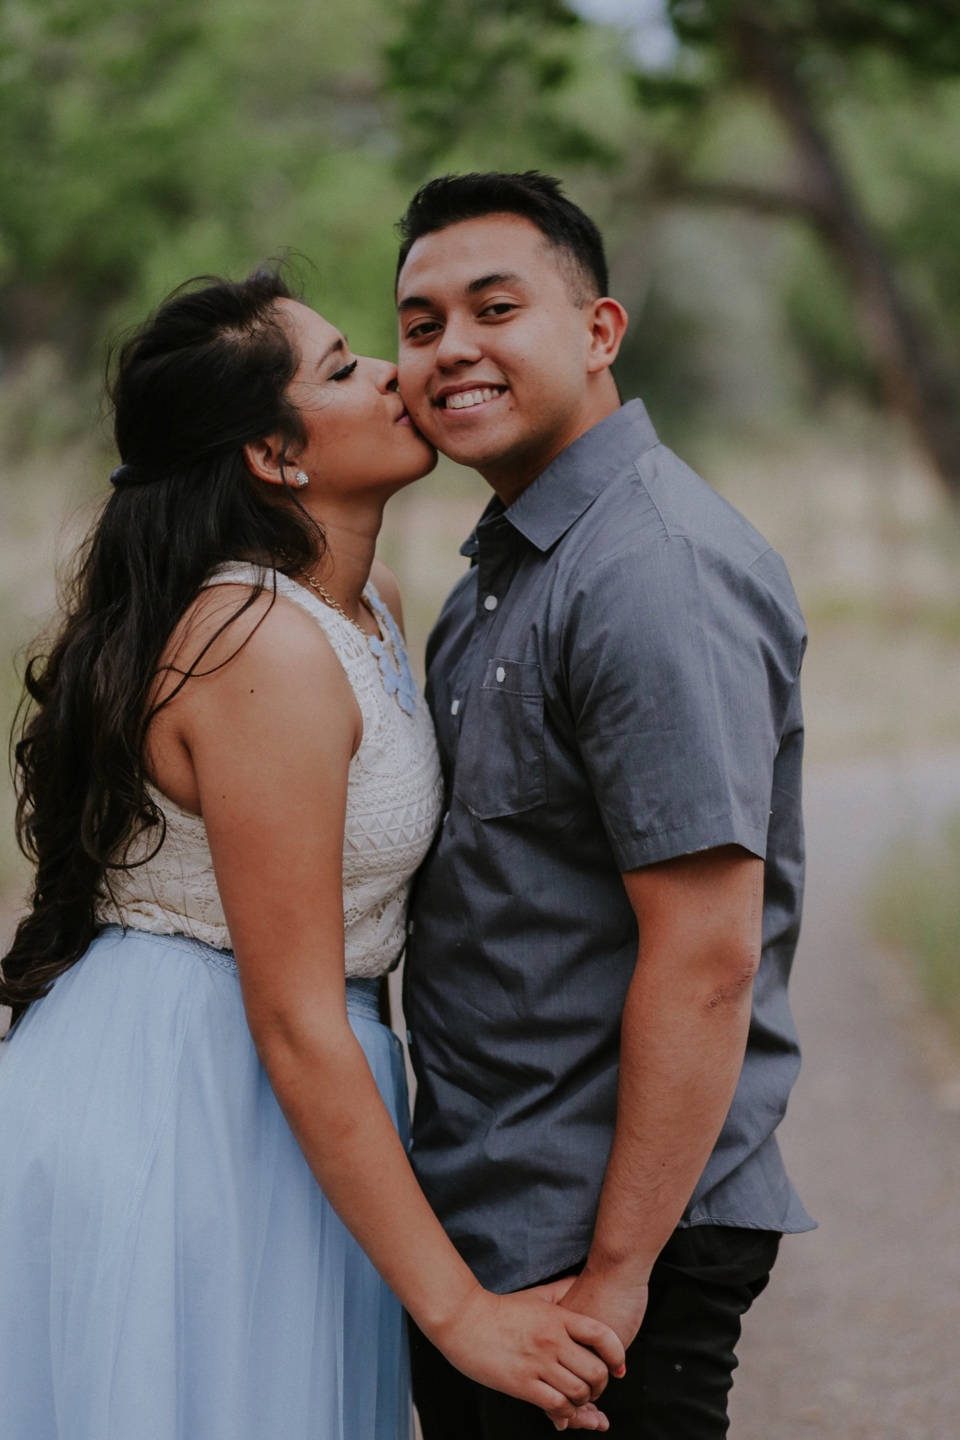  I had a blast capturing Isamar and Rafael’s Albuquerque engagement photos on a beautiful July day. The love Isa and Rafy have for one another is incredible and having the beautiful Albuquerque, New Mexico landscape as a backdrop was perfect! The Alb